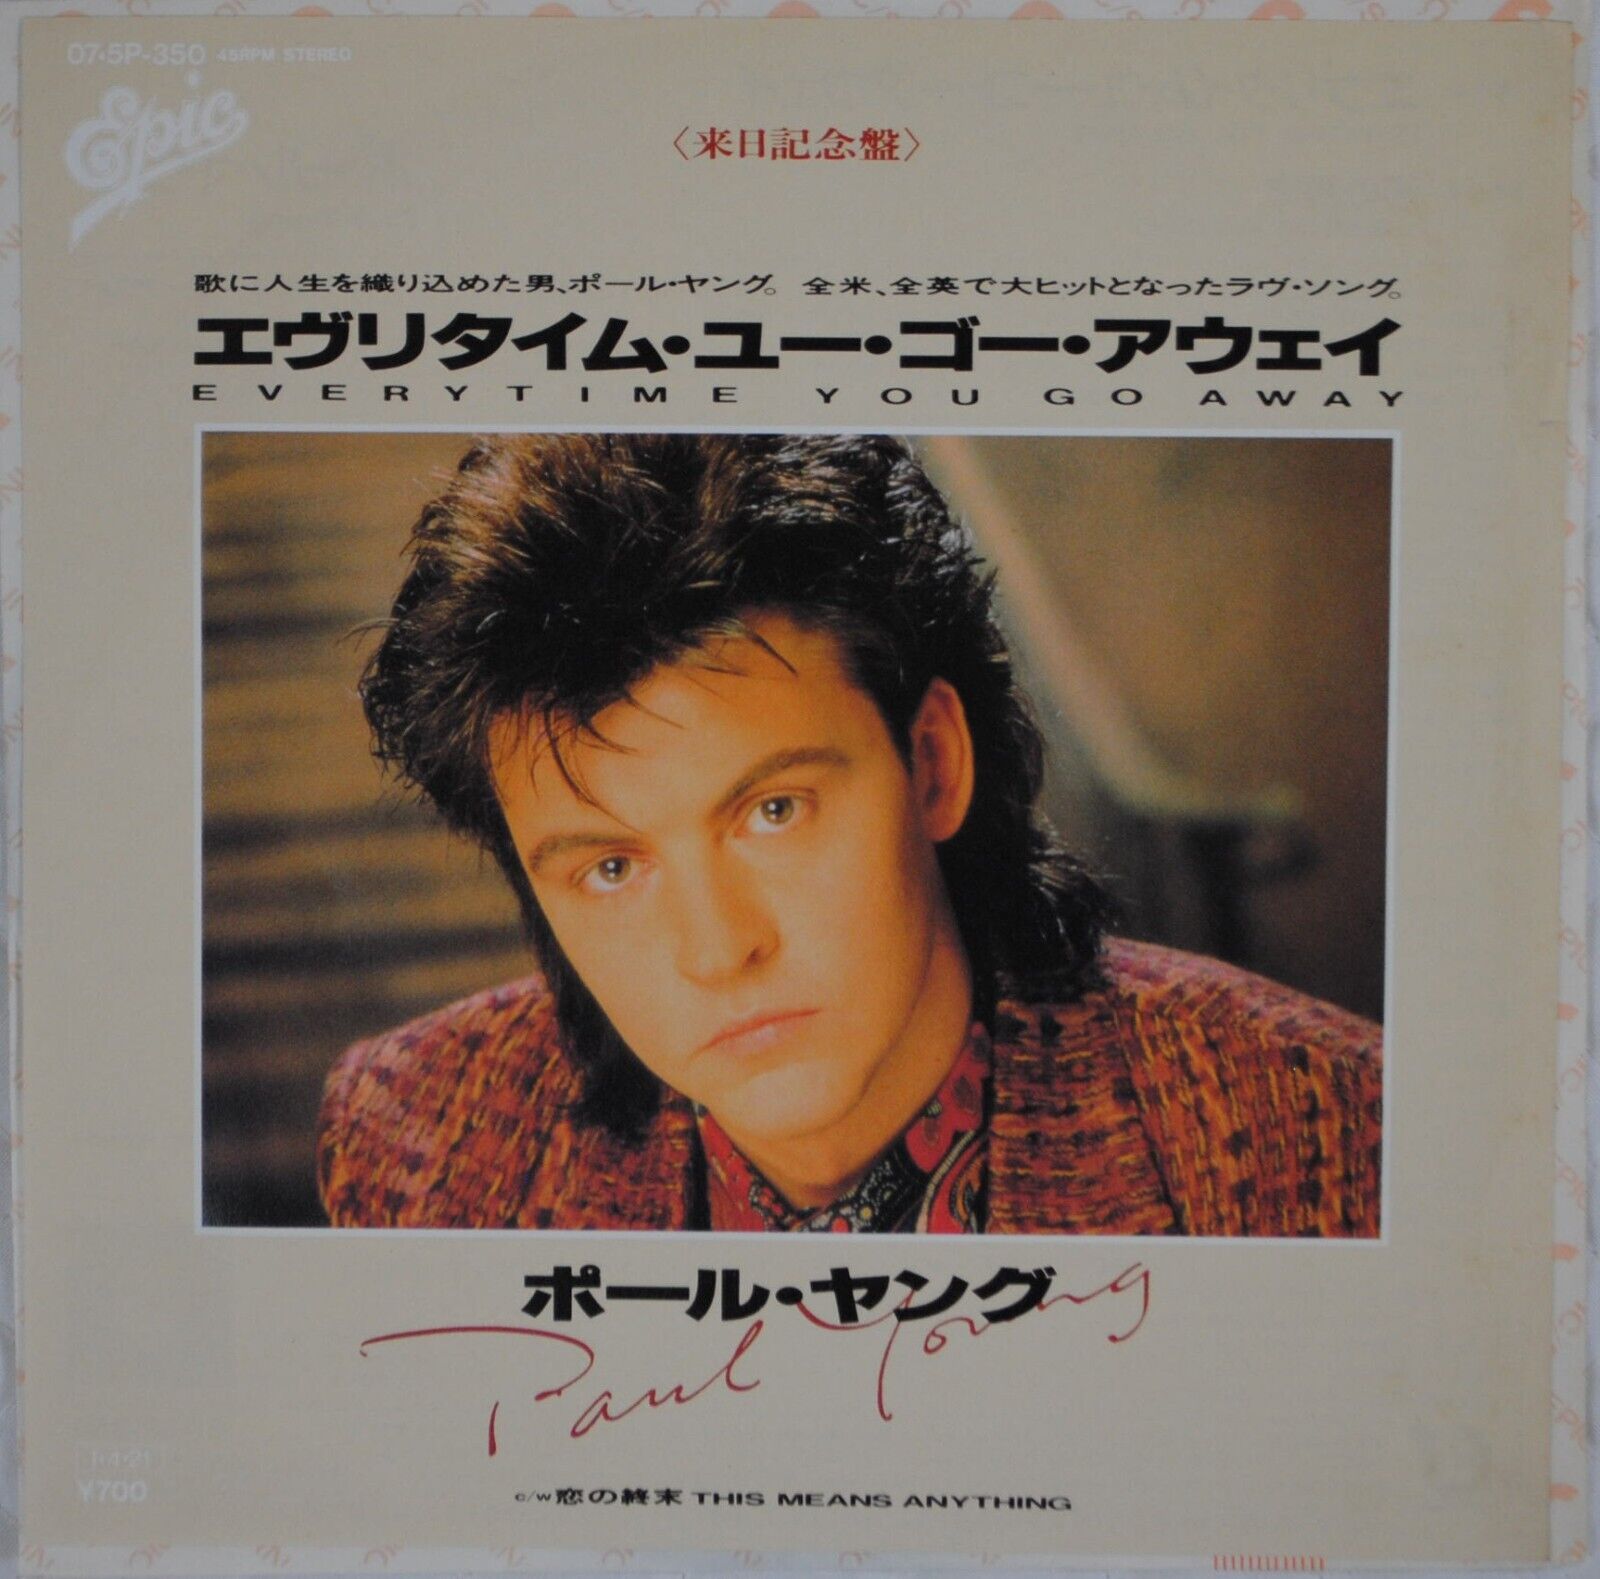 PAUL YOUNG  EVERYTIME YOU GO AWAY 45rpm 7" Japan Vinyl 07-5P-350